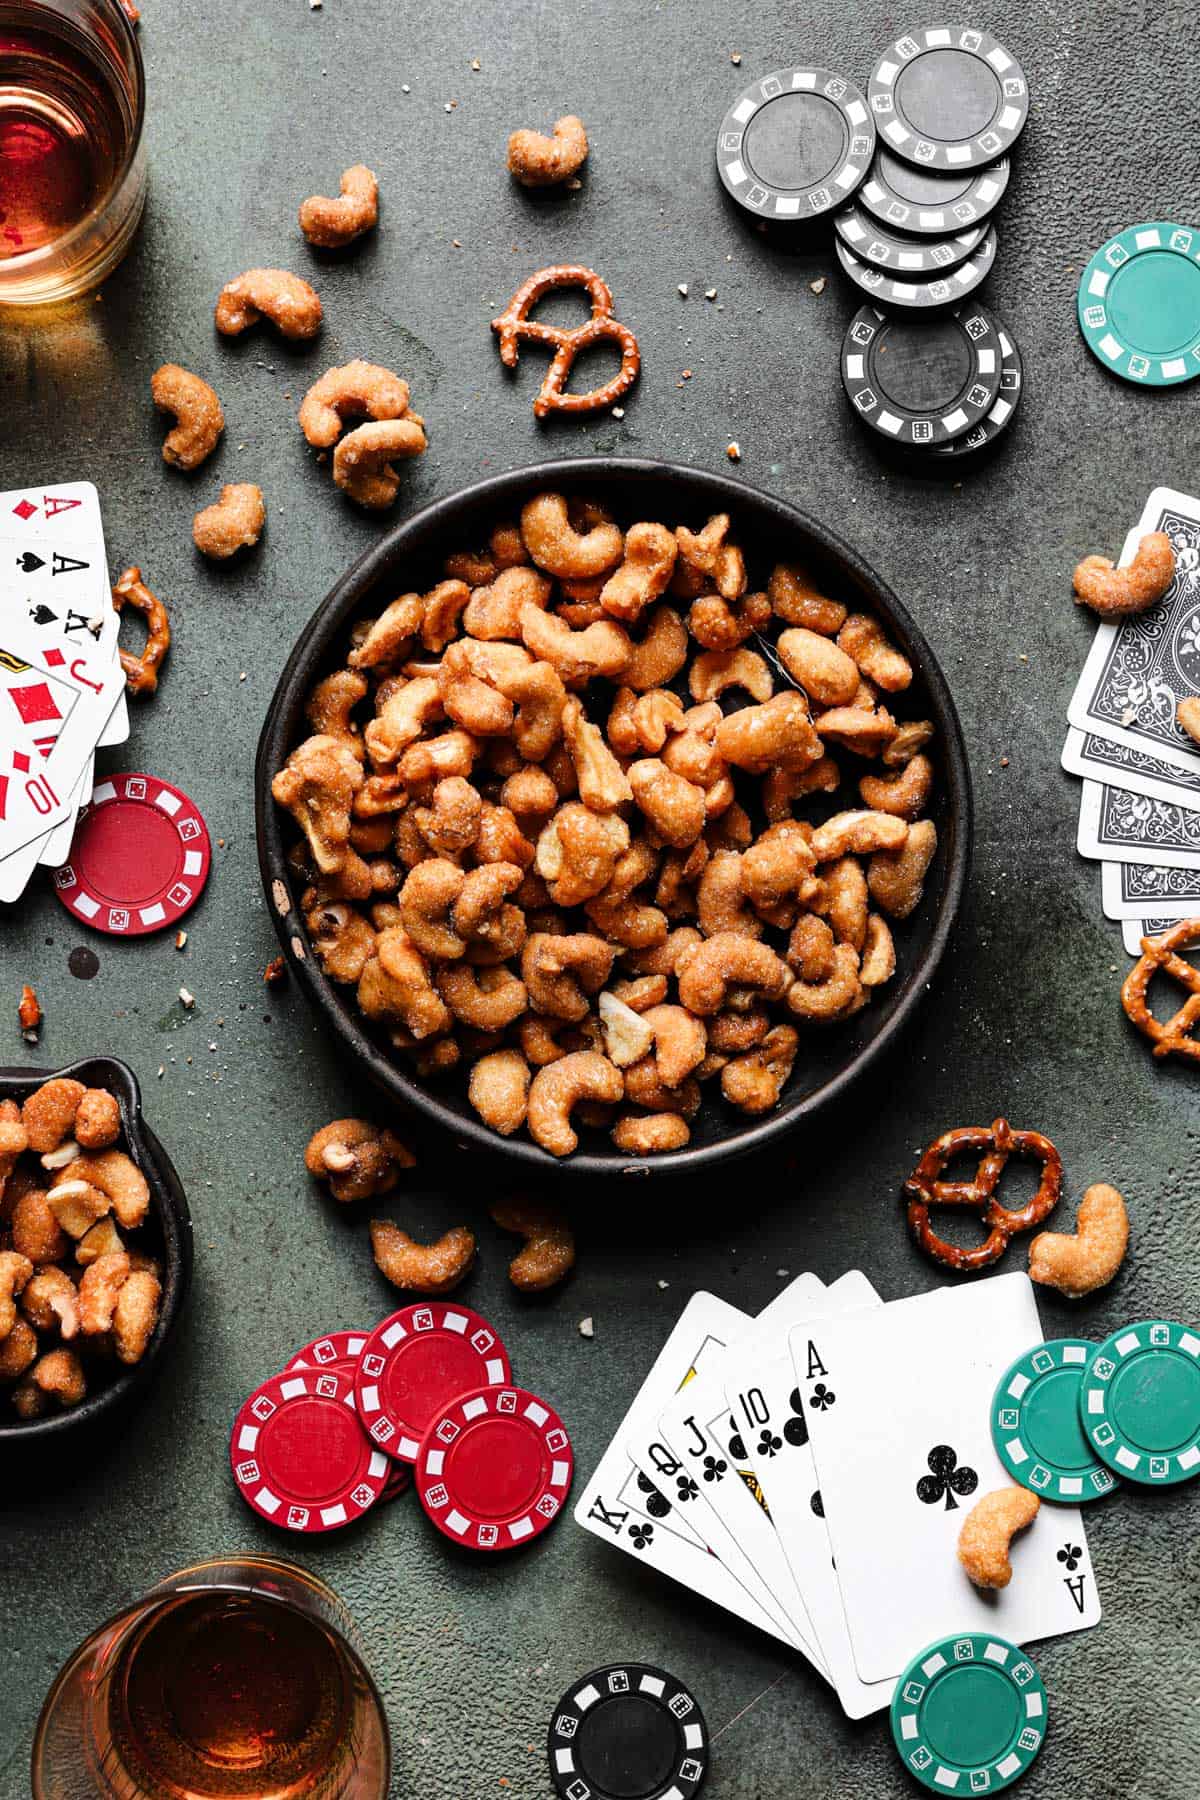 a poker table with a bowl of roasted cashews coated with honey at the center.